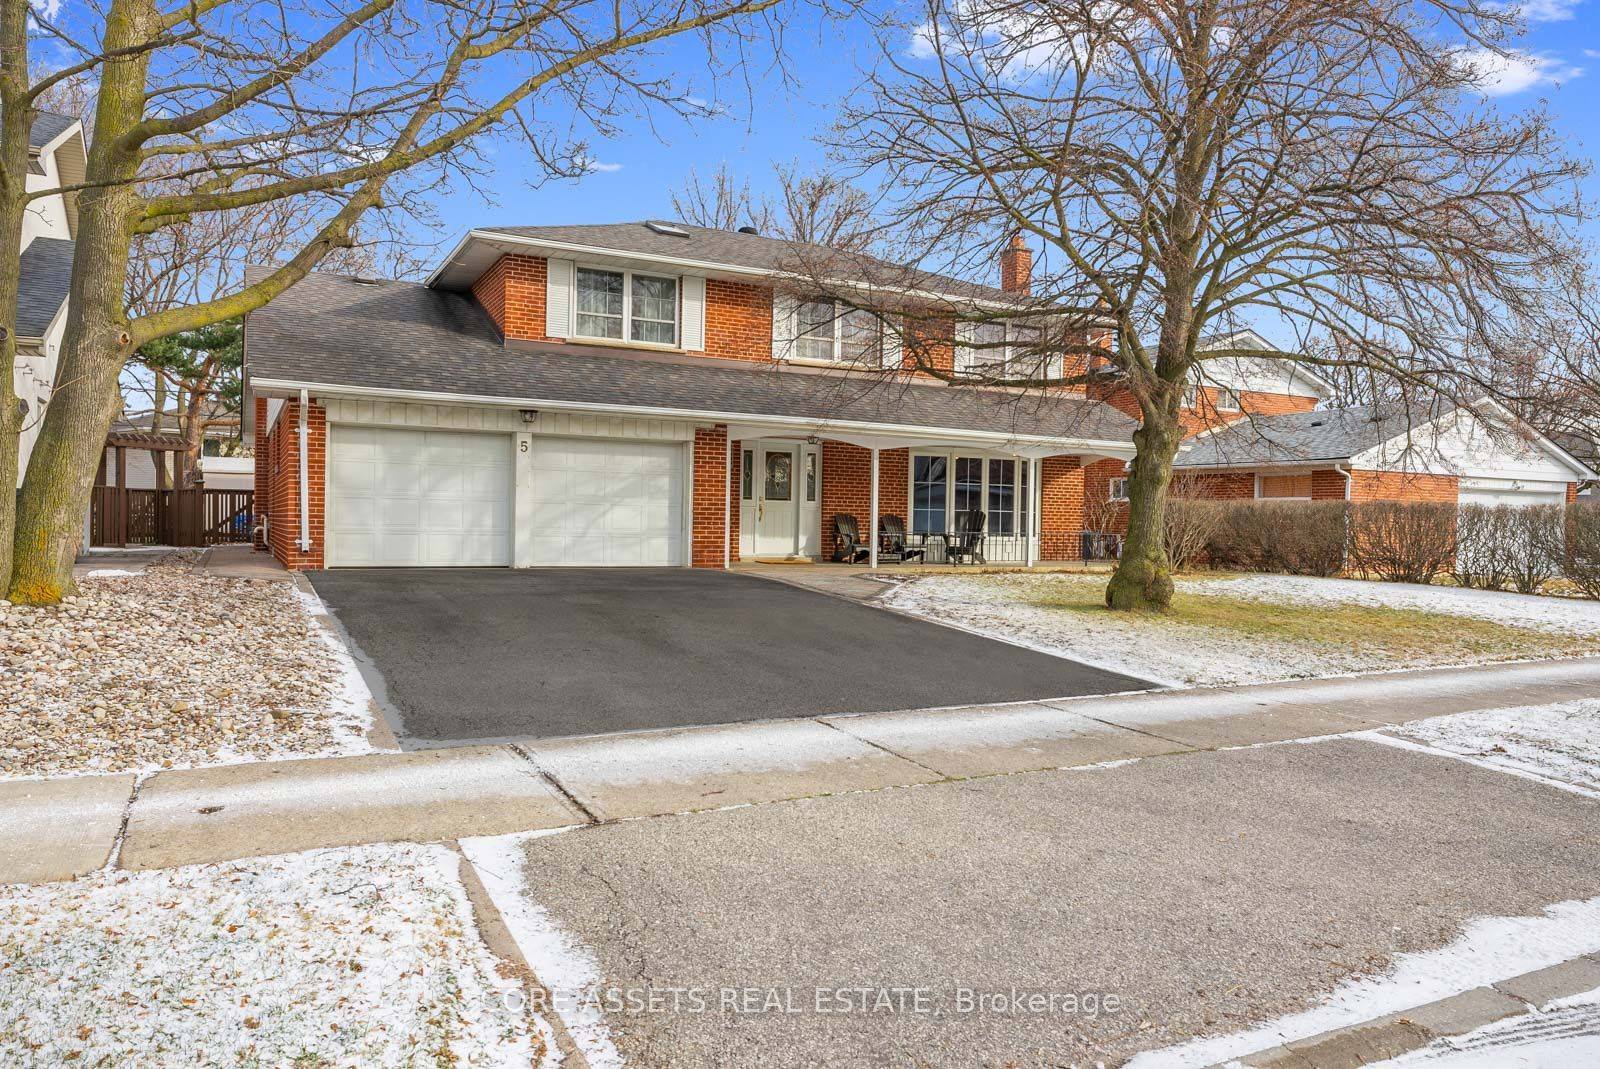 Welcome to this classic home on a family friendly crescent in Markland that combines timeless charm w modern convenience across its 3000 square feet.